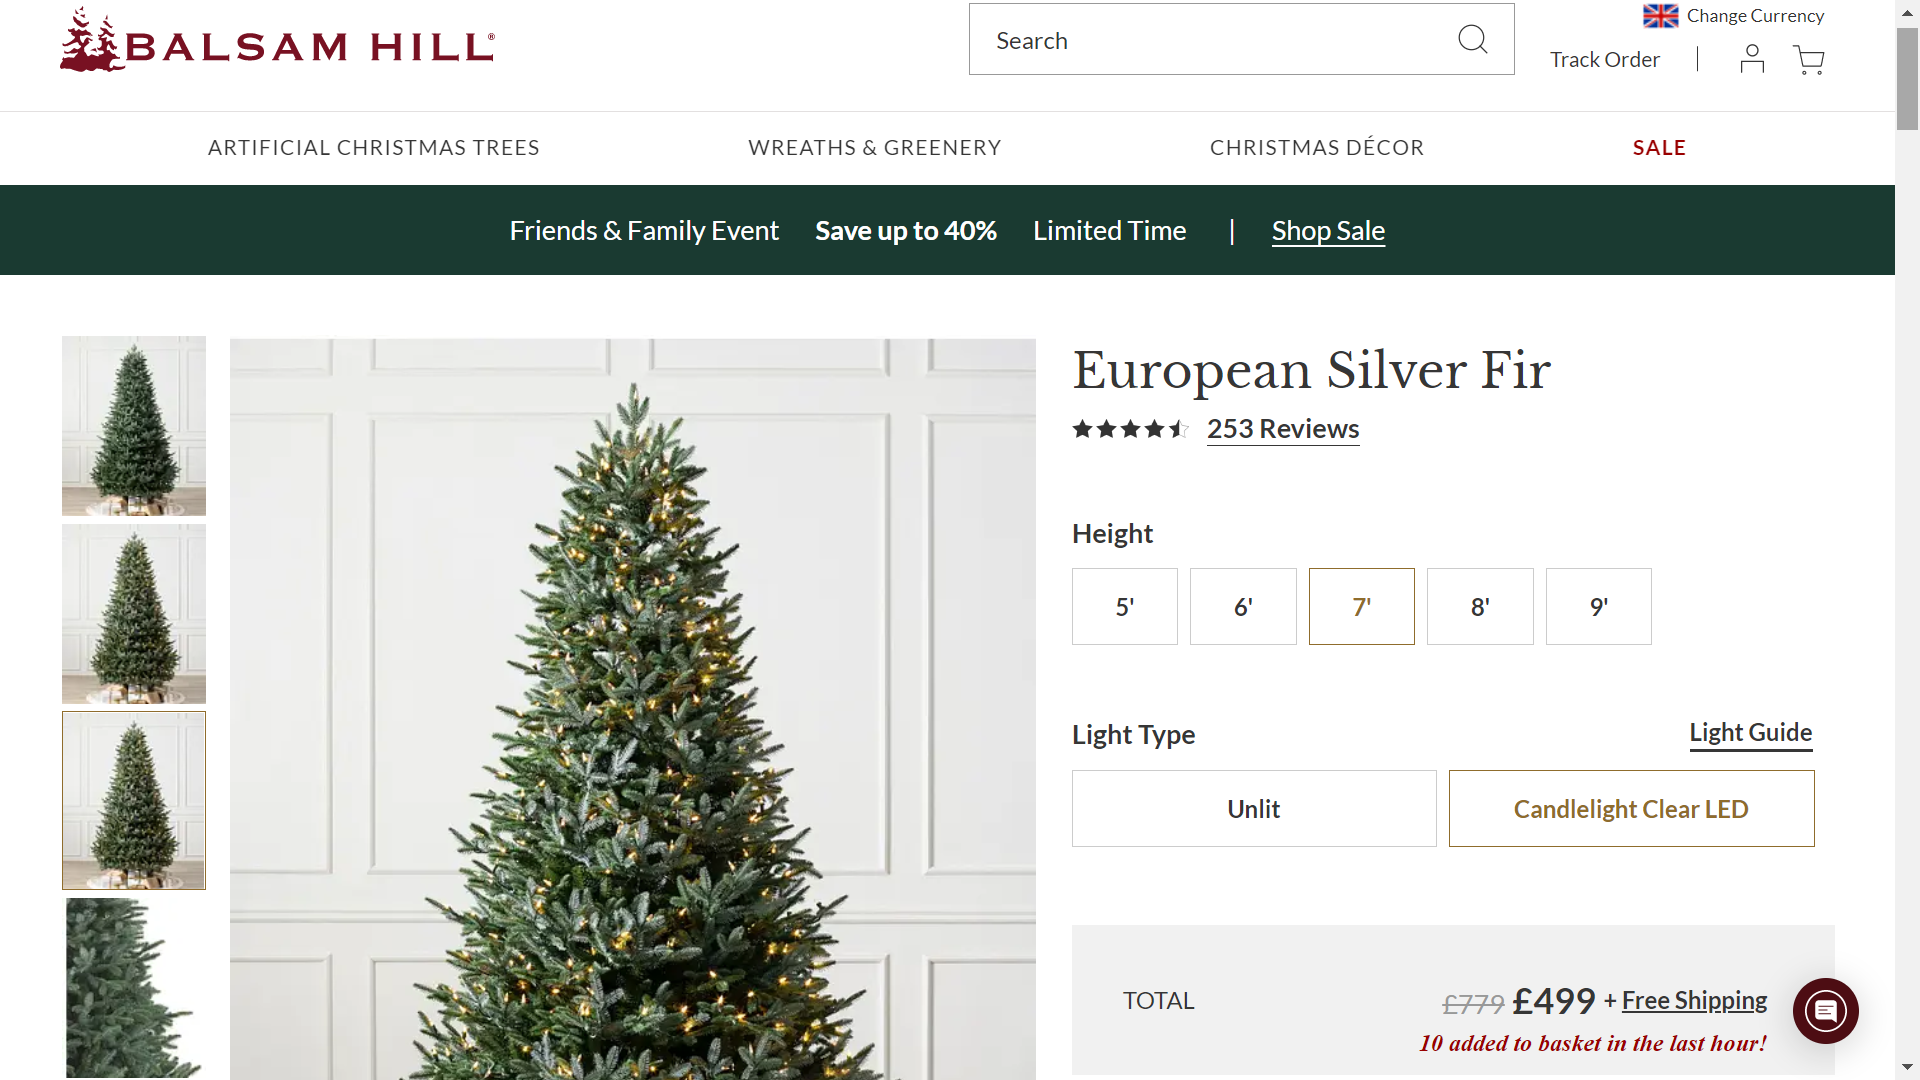 BH (The worlds leading Christmas Tree Brand) European Silver Fir 7' Tree with LED Clear Lights - Image 2 of 2